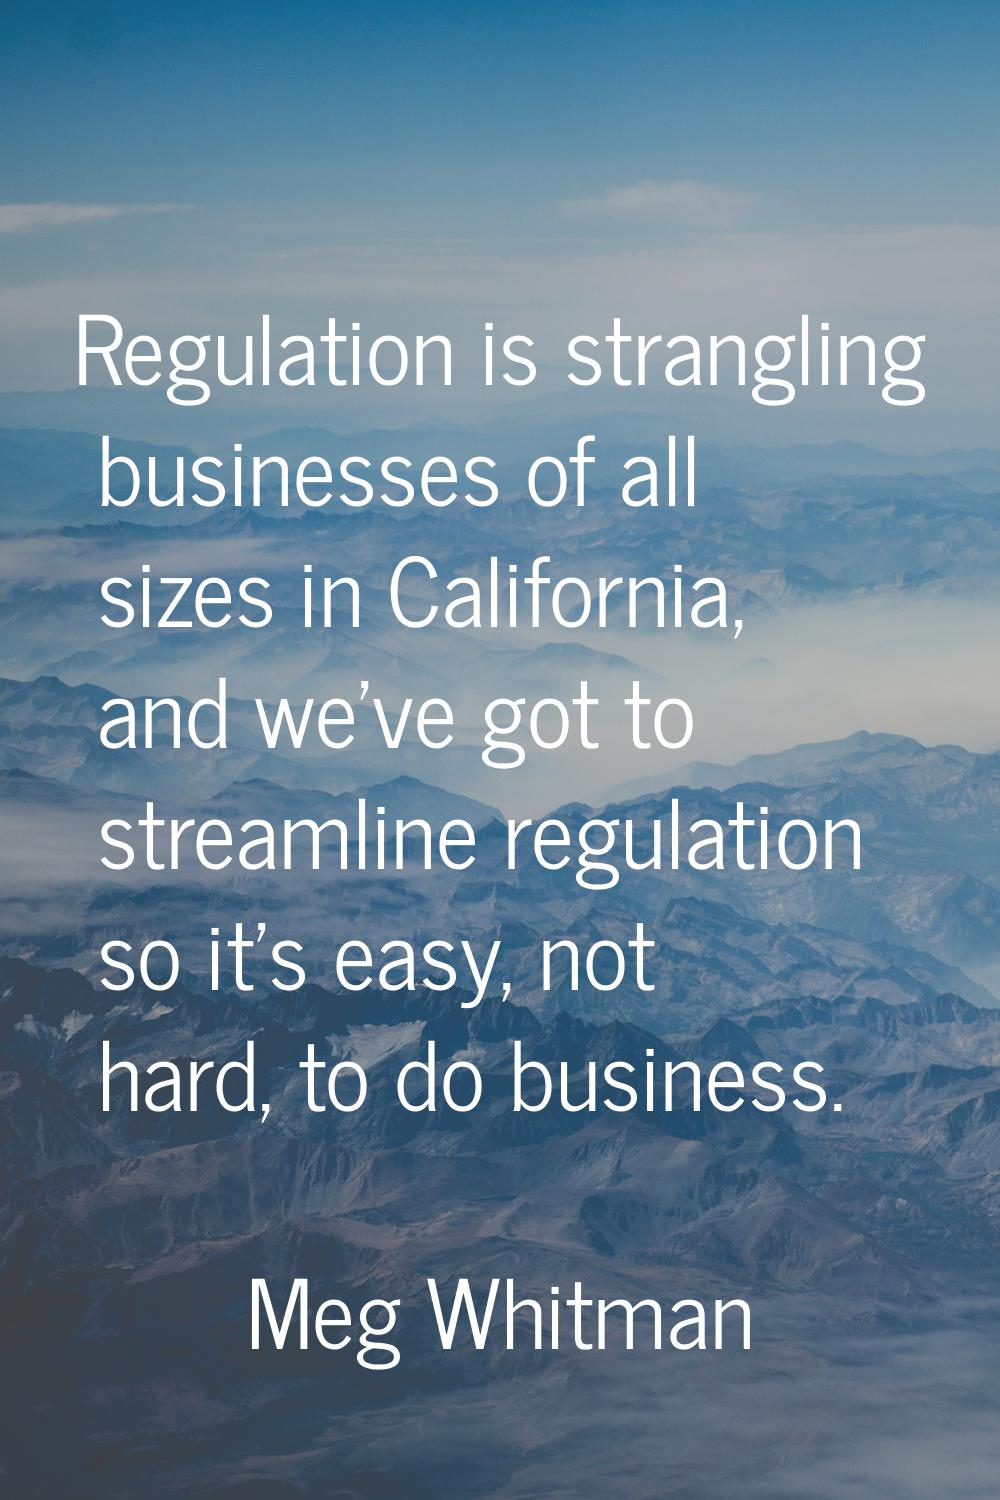 Regulation is strangling businesses of all sizes in California, and we've got to streamline regulat